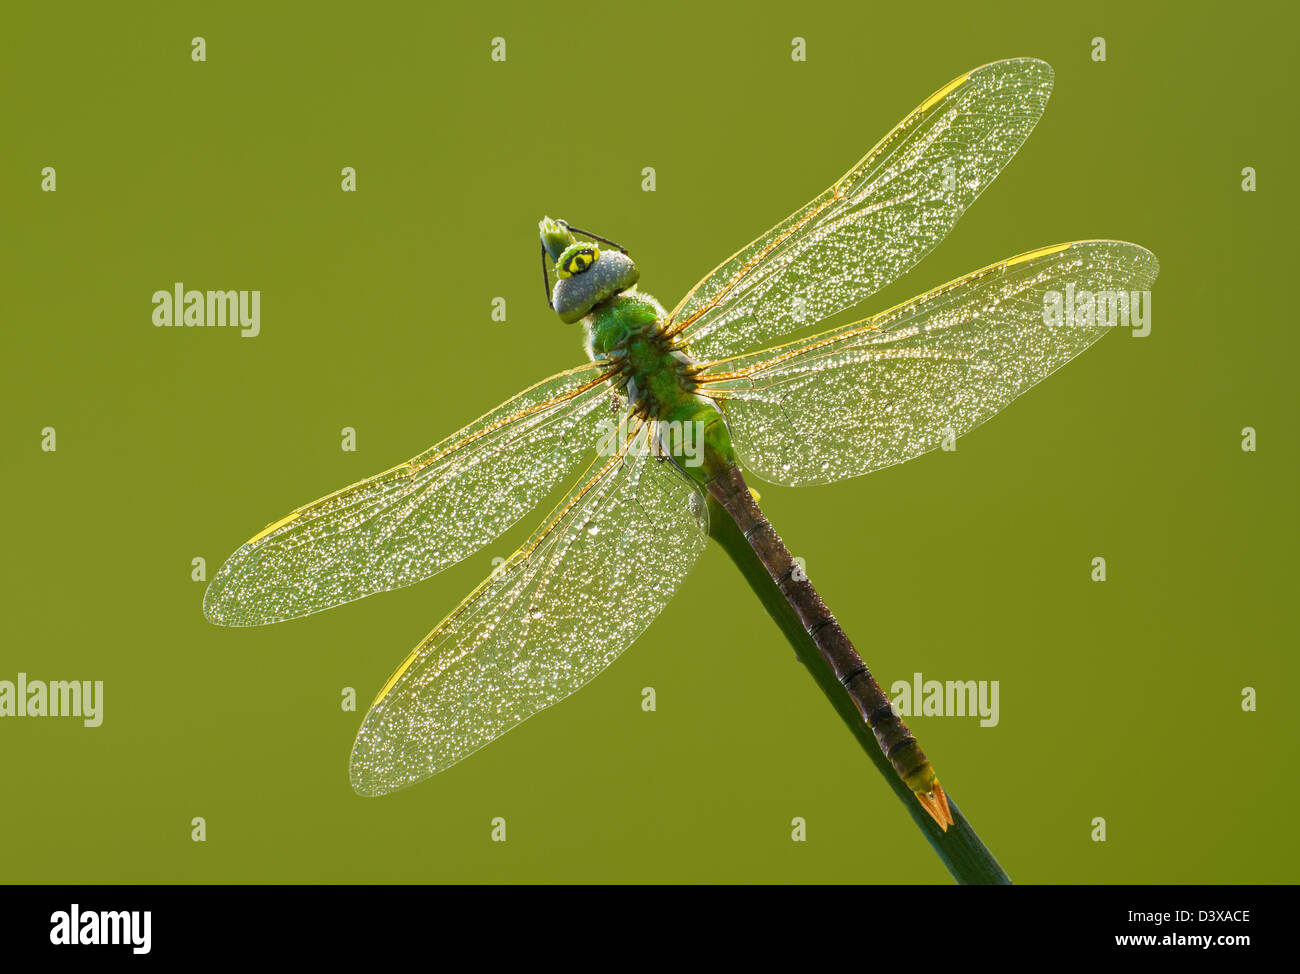 Green darner dragonfly (Anax junius) in the morning full of dew drops on green background. Stock Photo